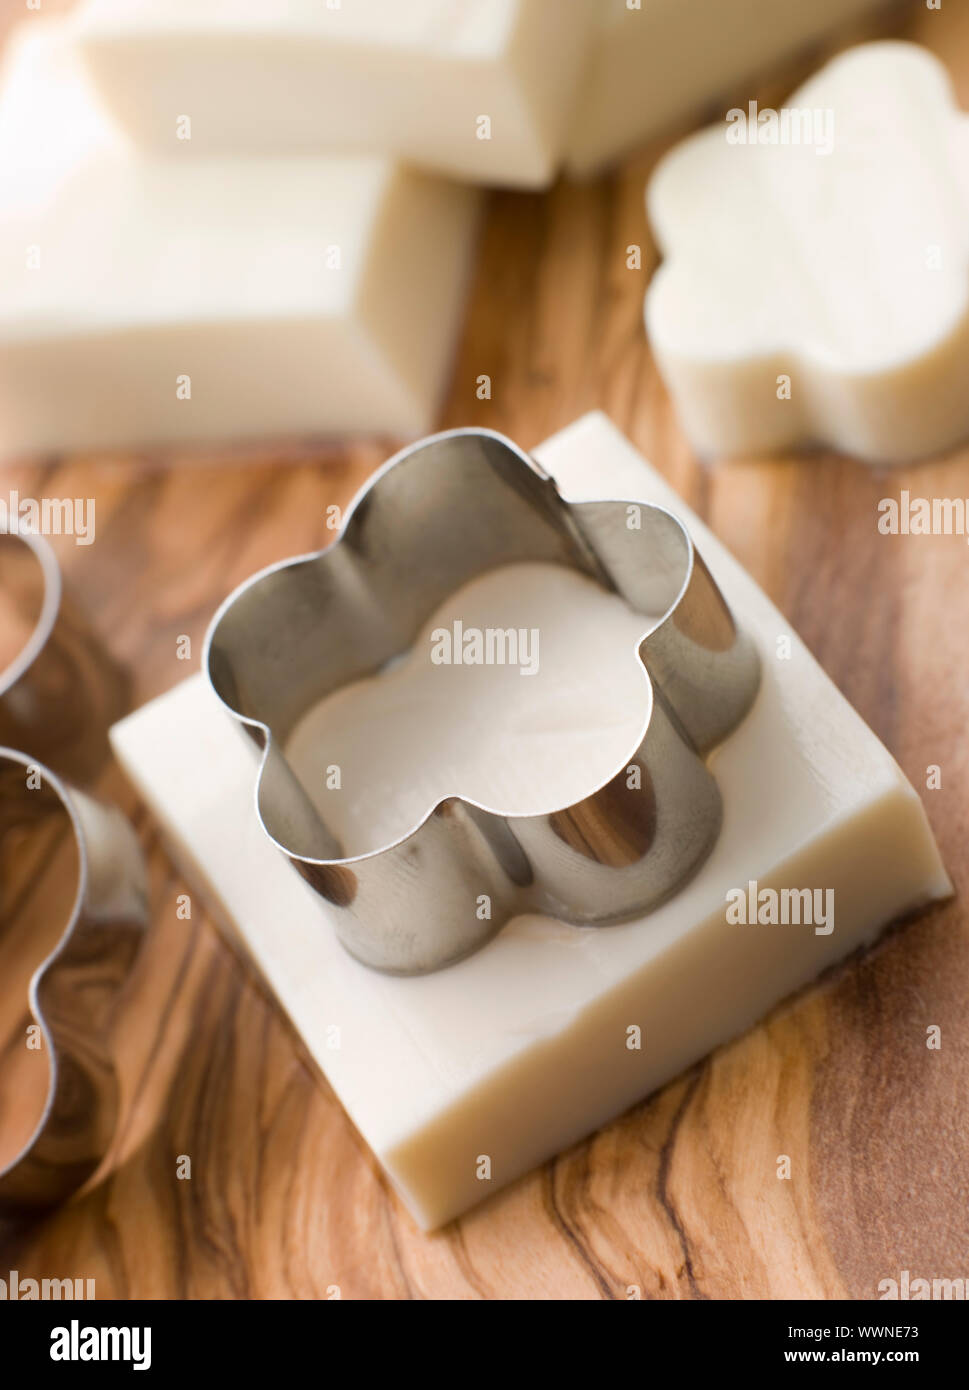 Firm Tofu on a Chopping Board with shape cutter Stock Photo - Alamy